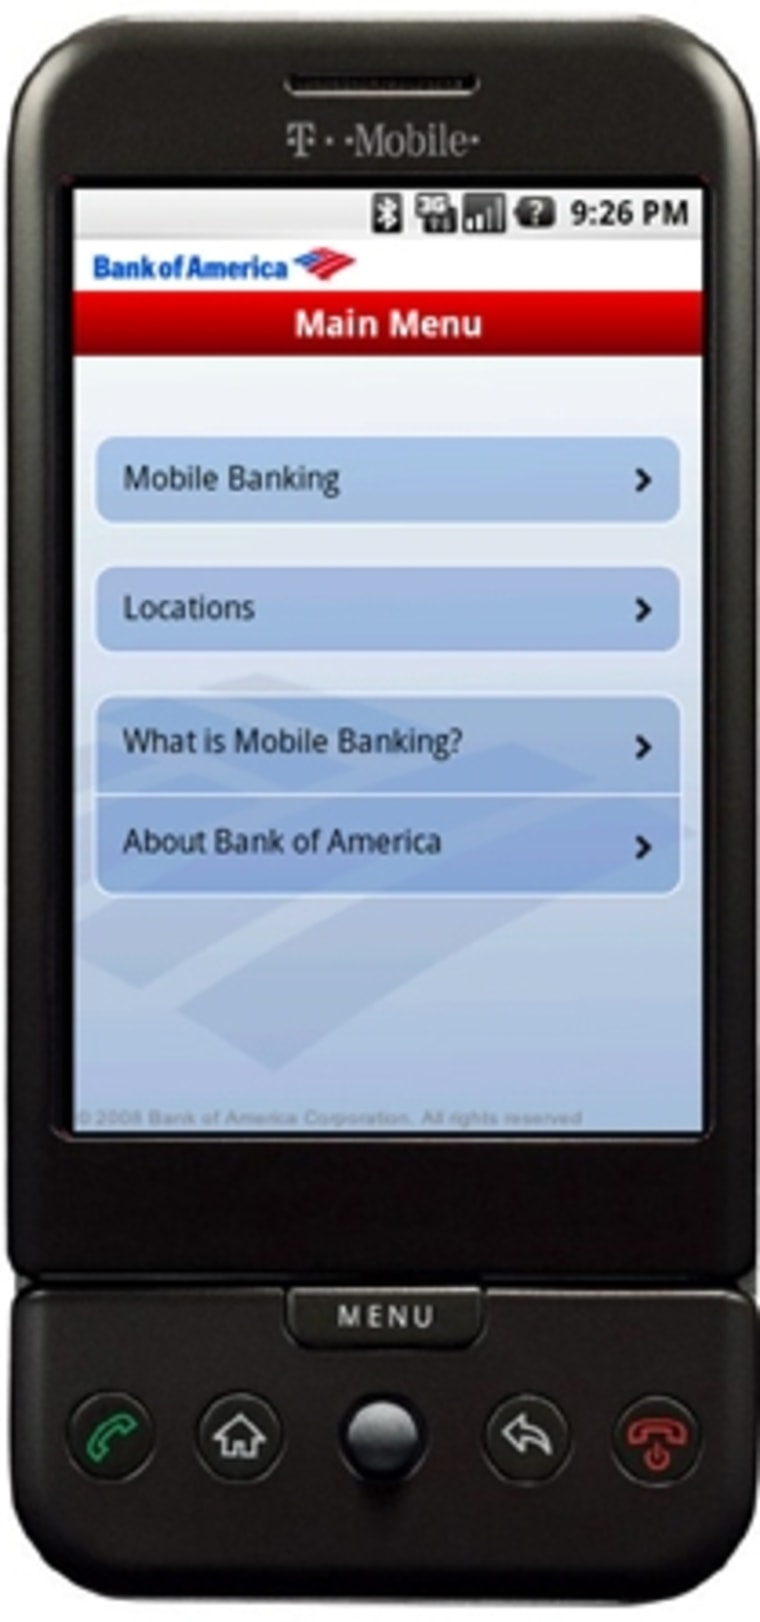 Image: Bank of America on Google Android phone